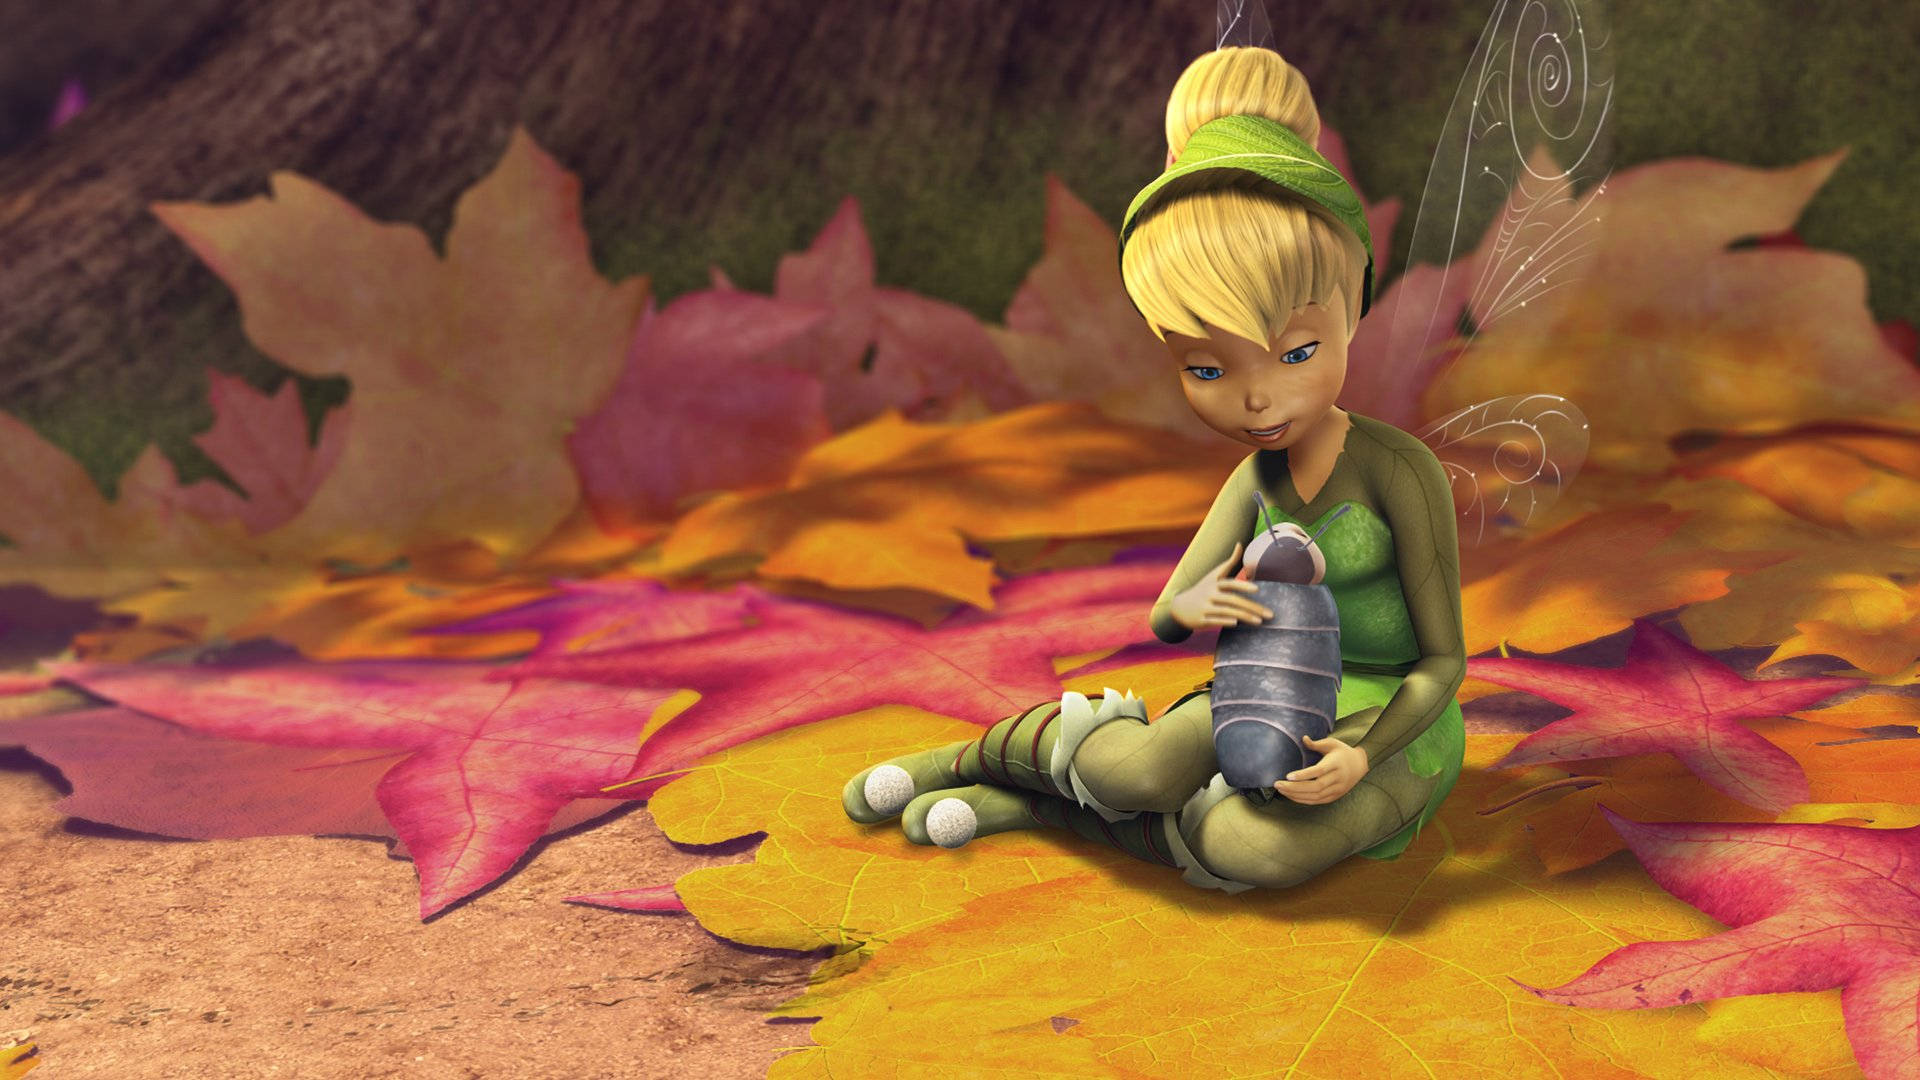 Tinker Bell Laying Down Wallpaper